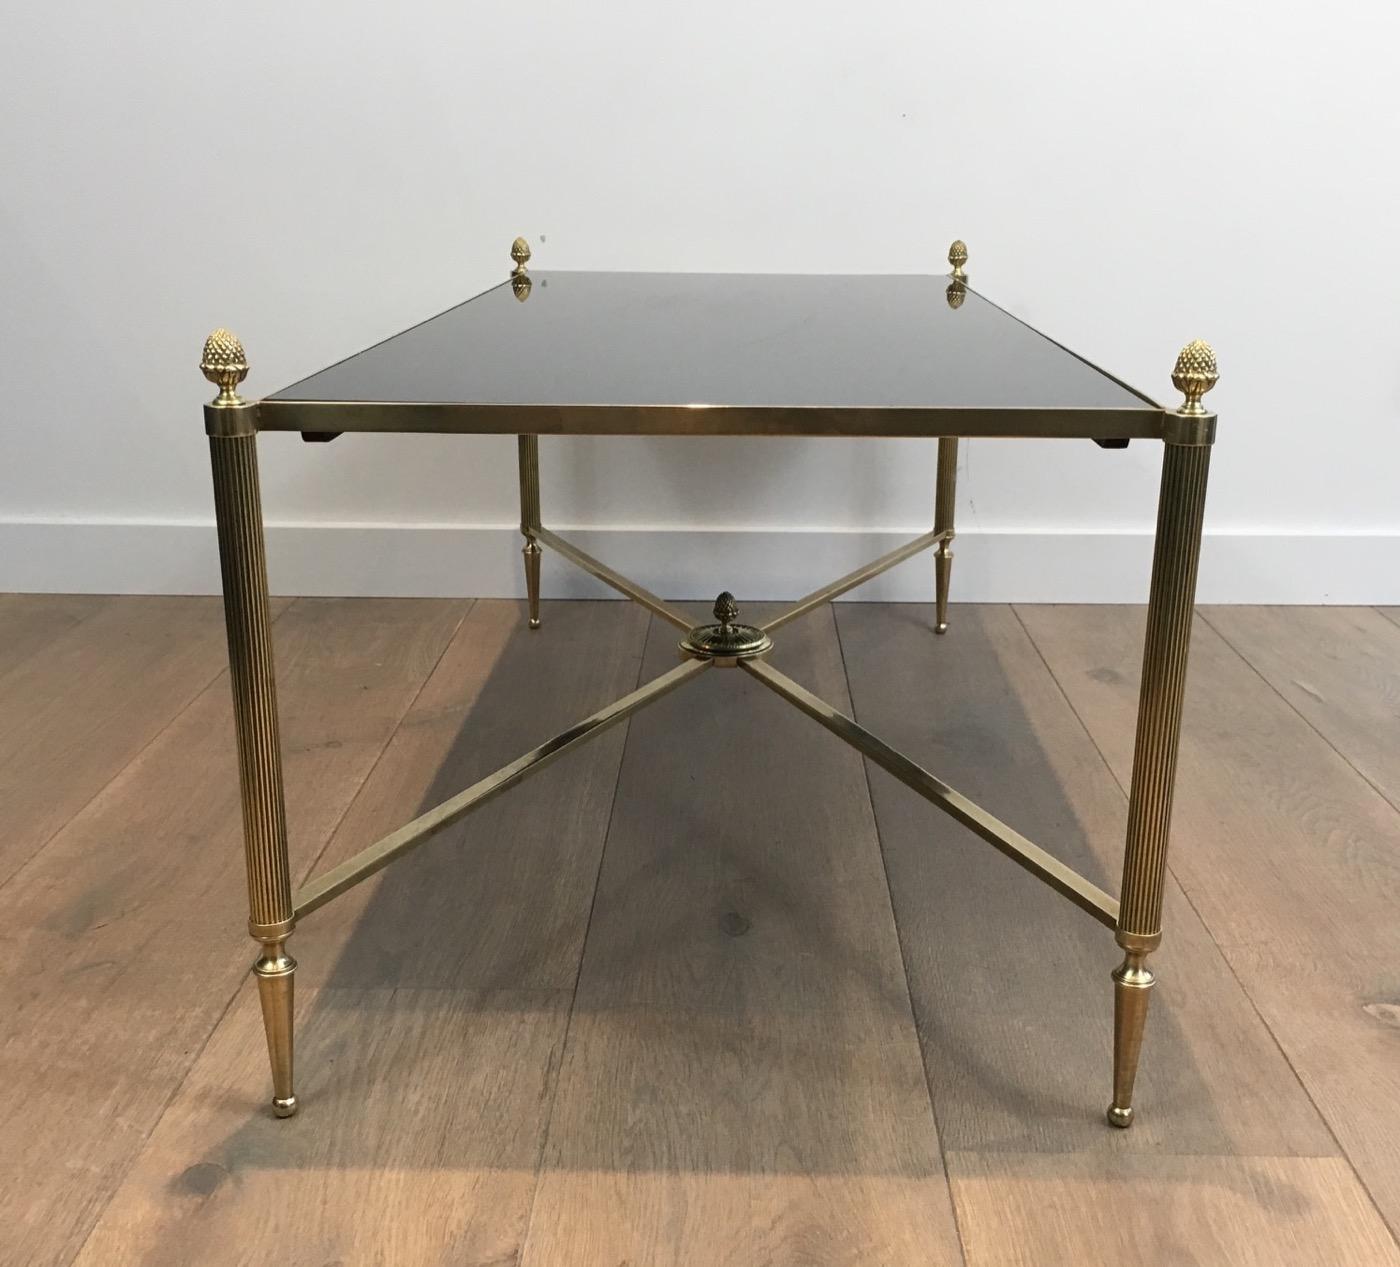 Mid-20th Century Neoclassical Brass Coffee Table with Black Lacquered Glass, French, circa 1940